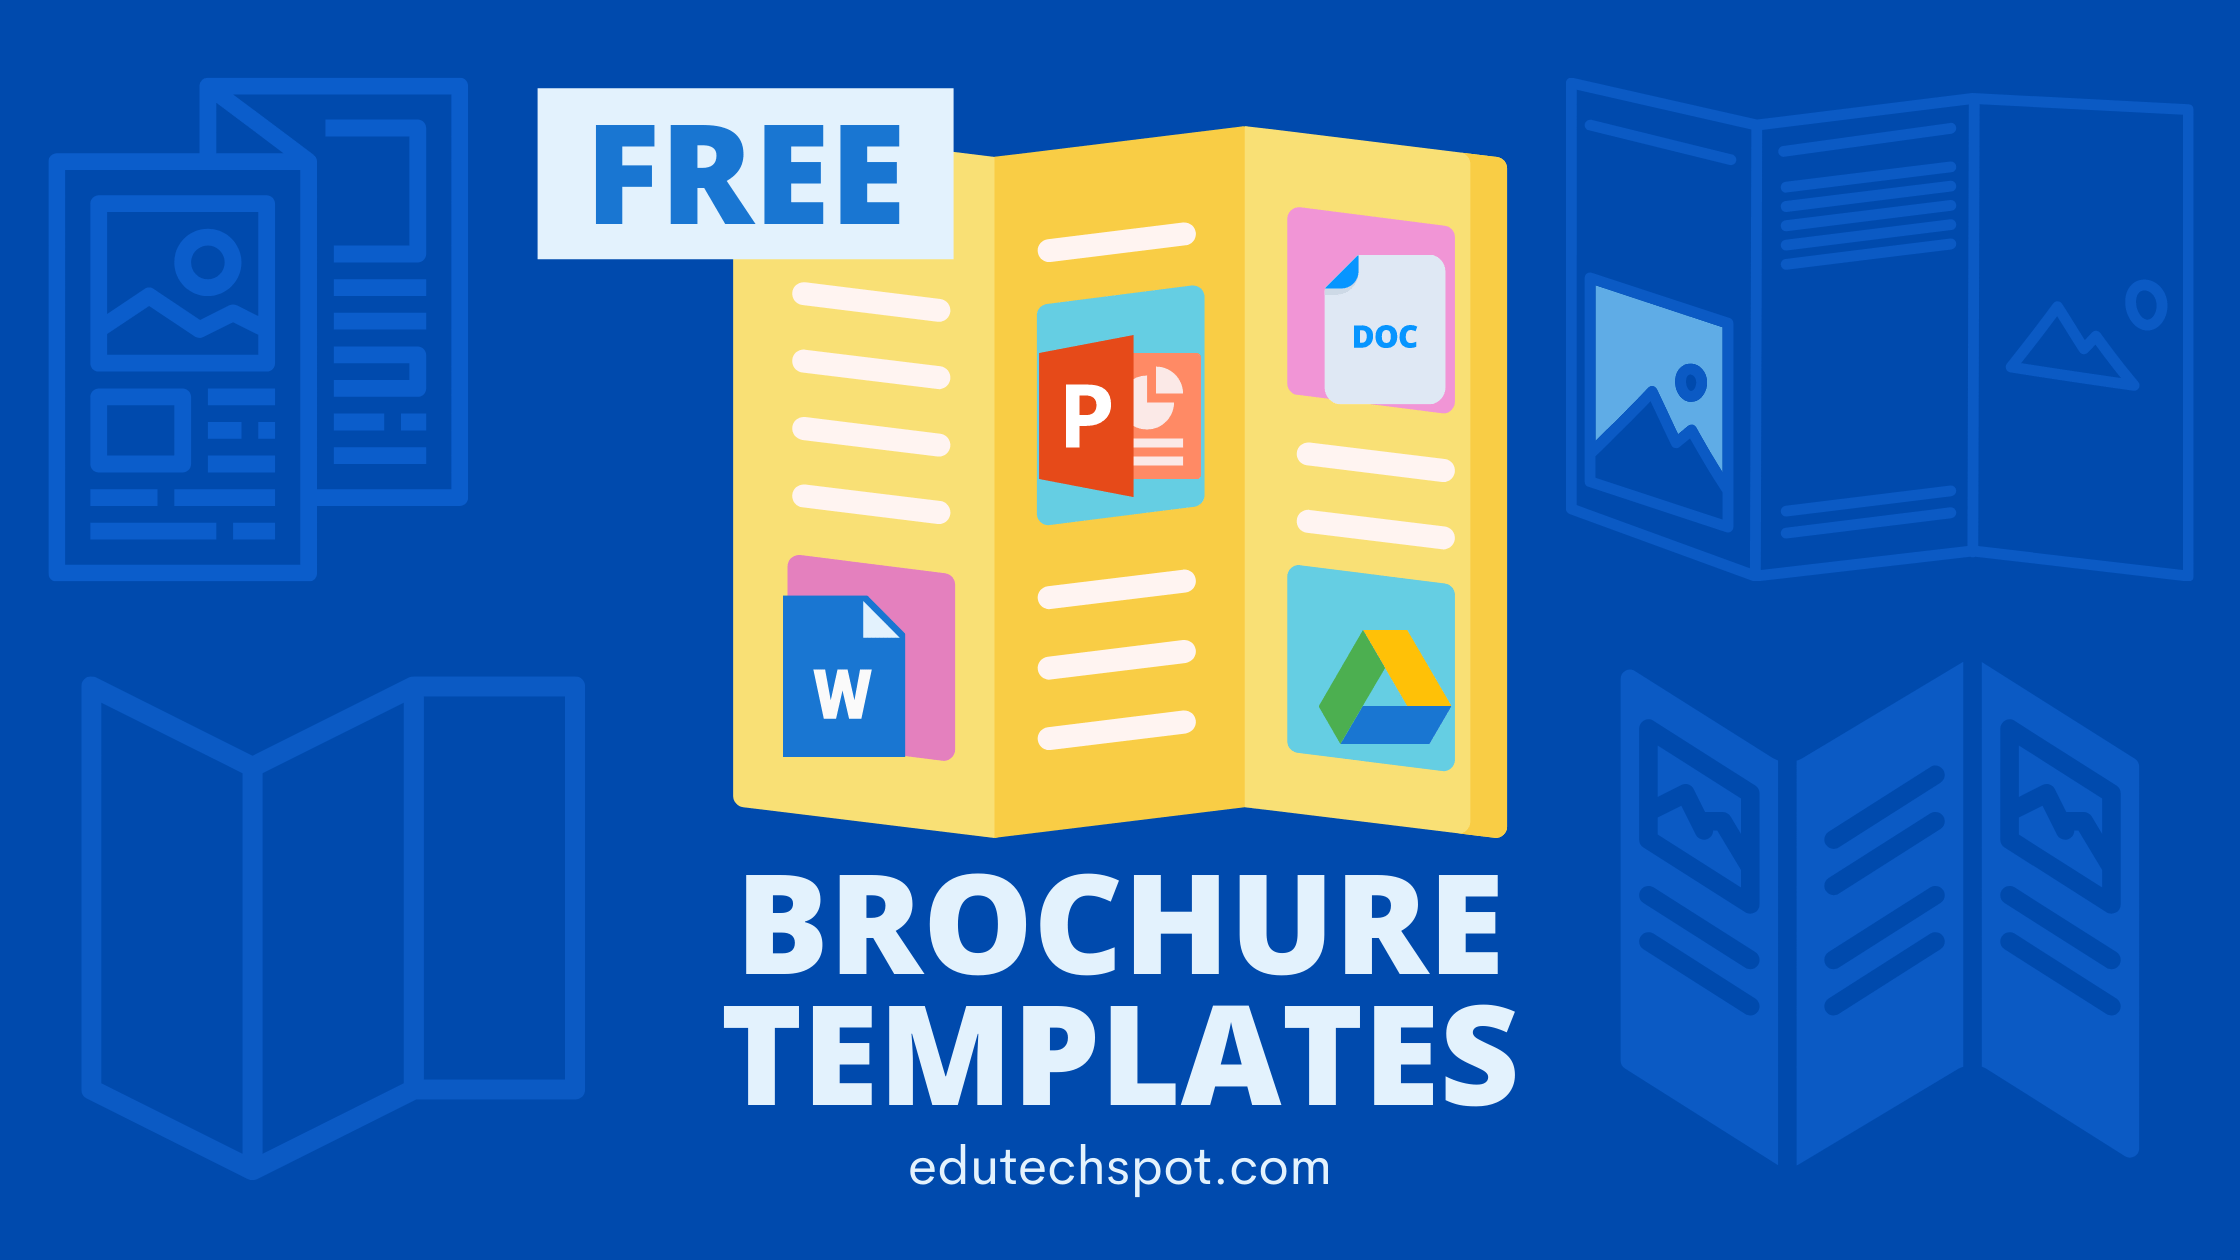 Brochure Template for google docs, Words, Power Point, Slides [ FREE ] Intended For Google Drive Brochure Template